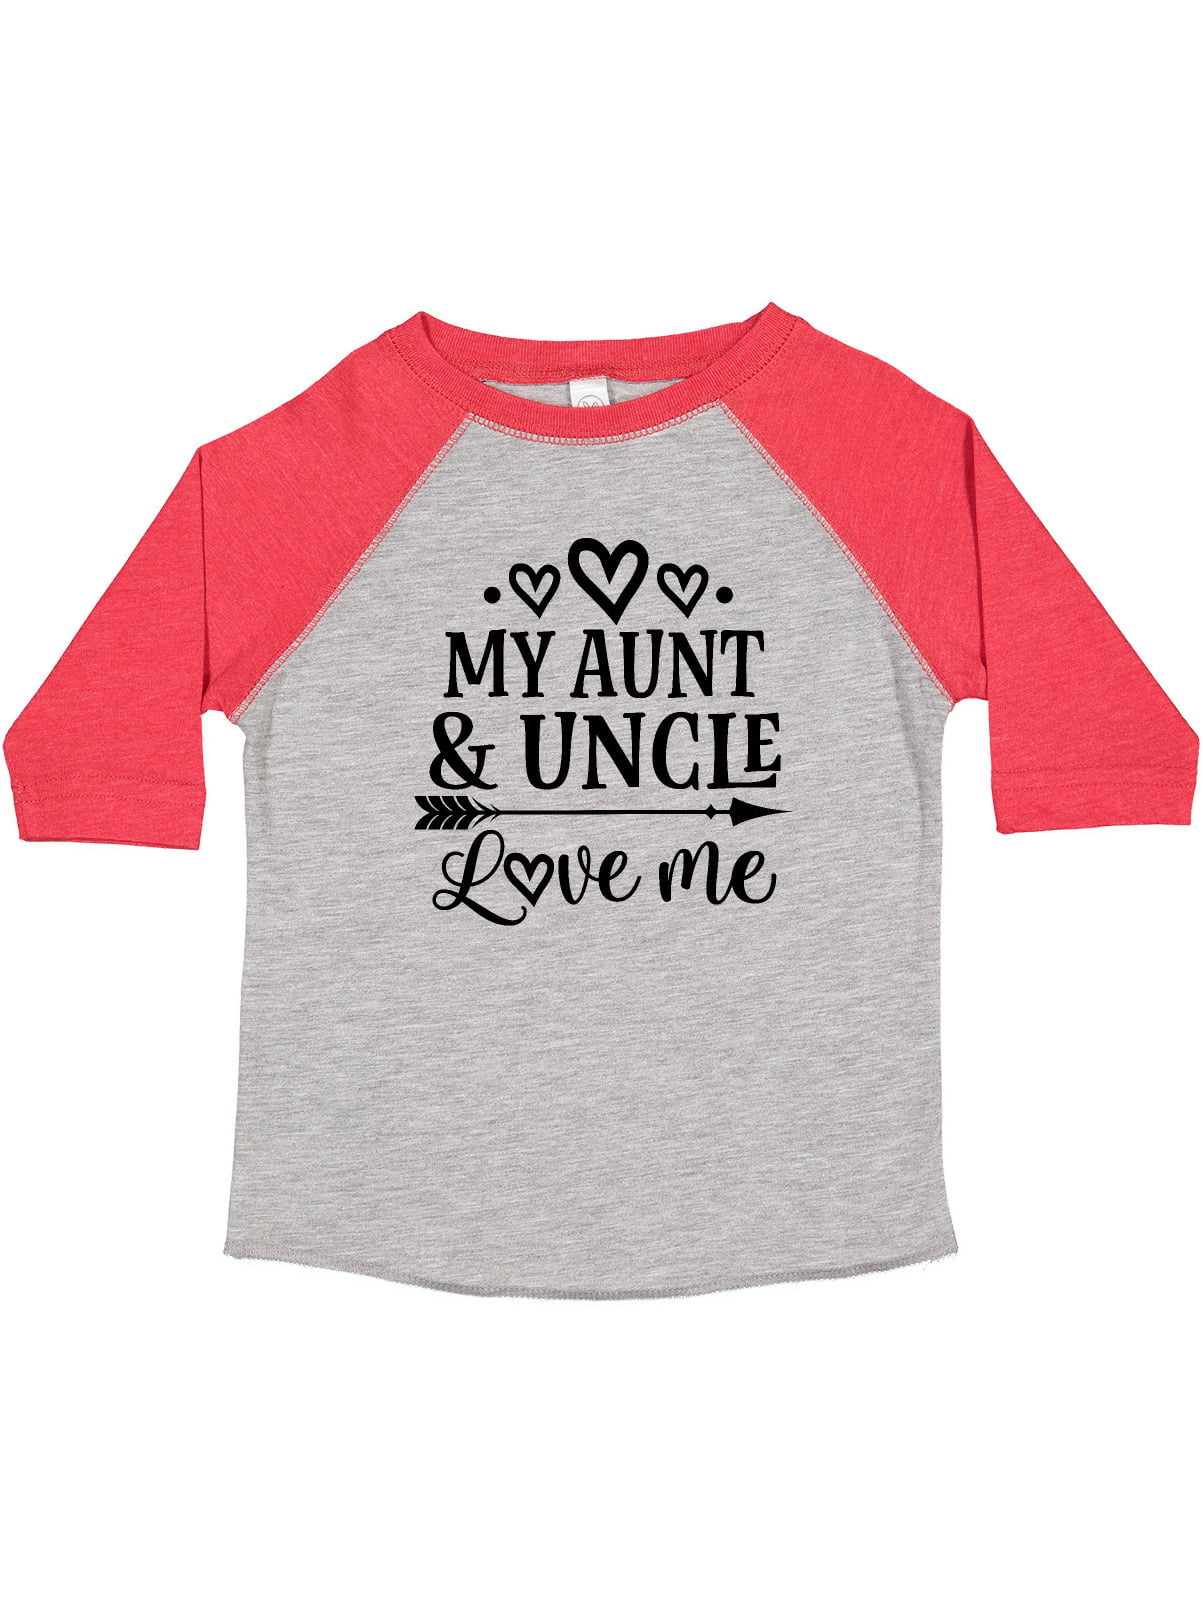 inktastic Auntie Loves Me Niece Gift Toddler T-Shirt